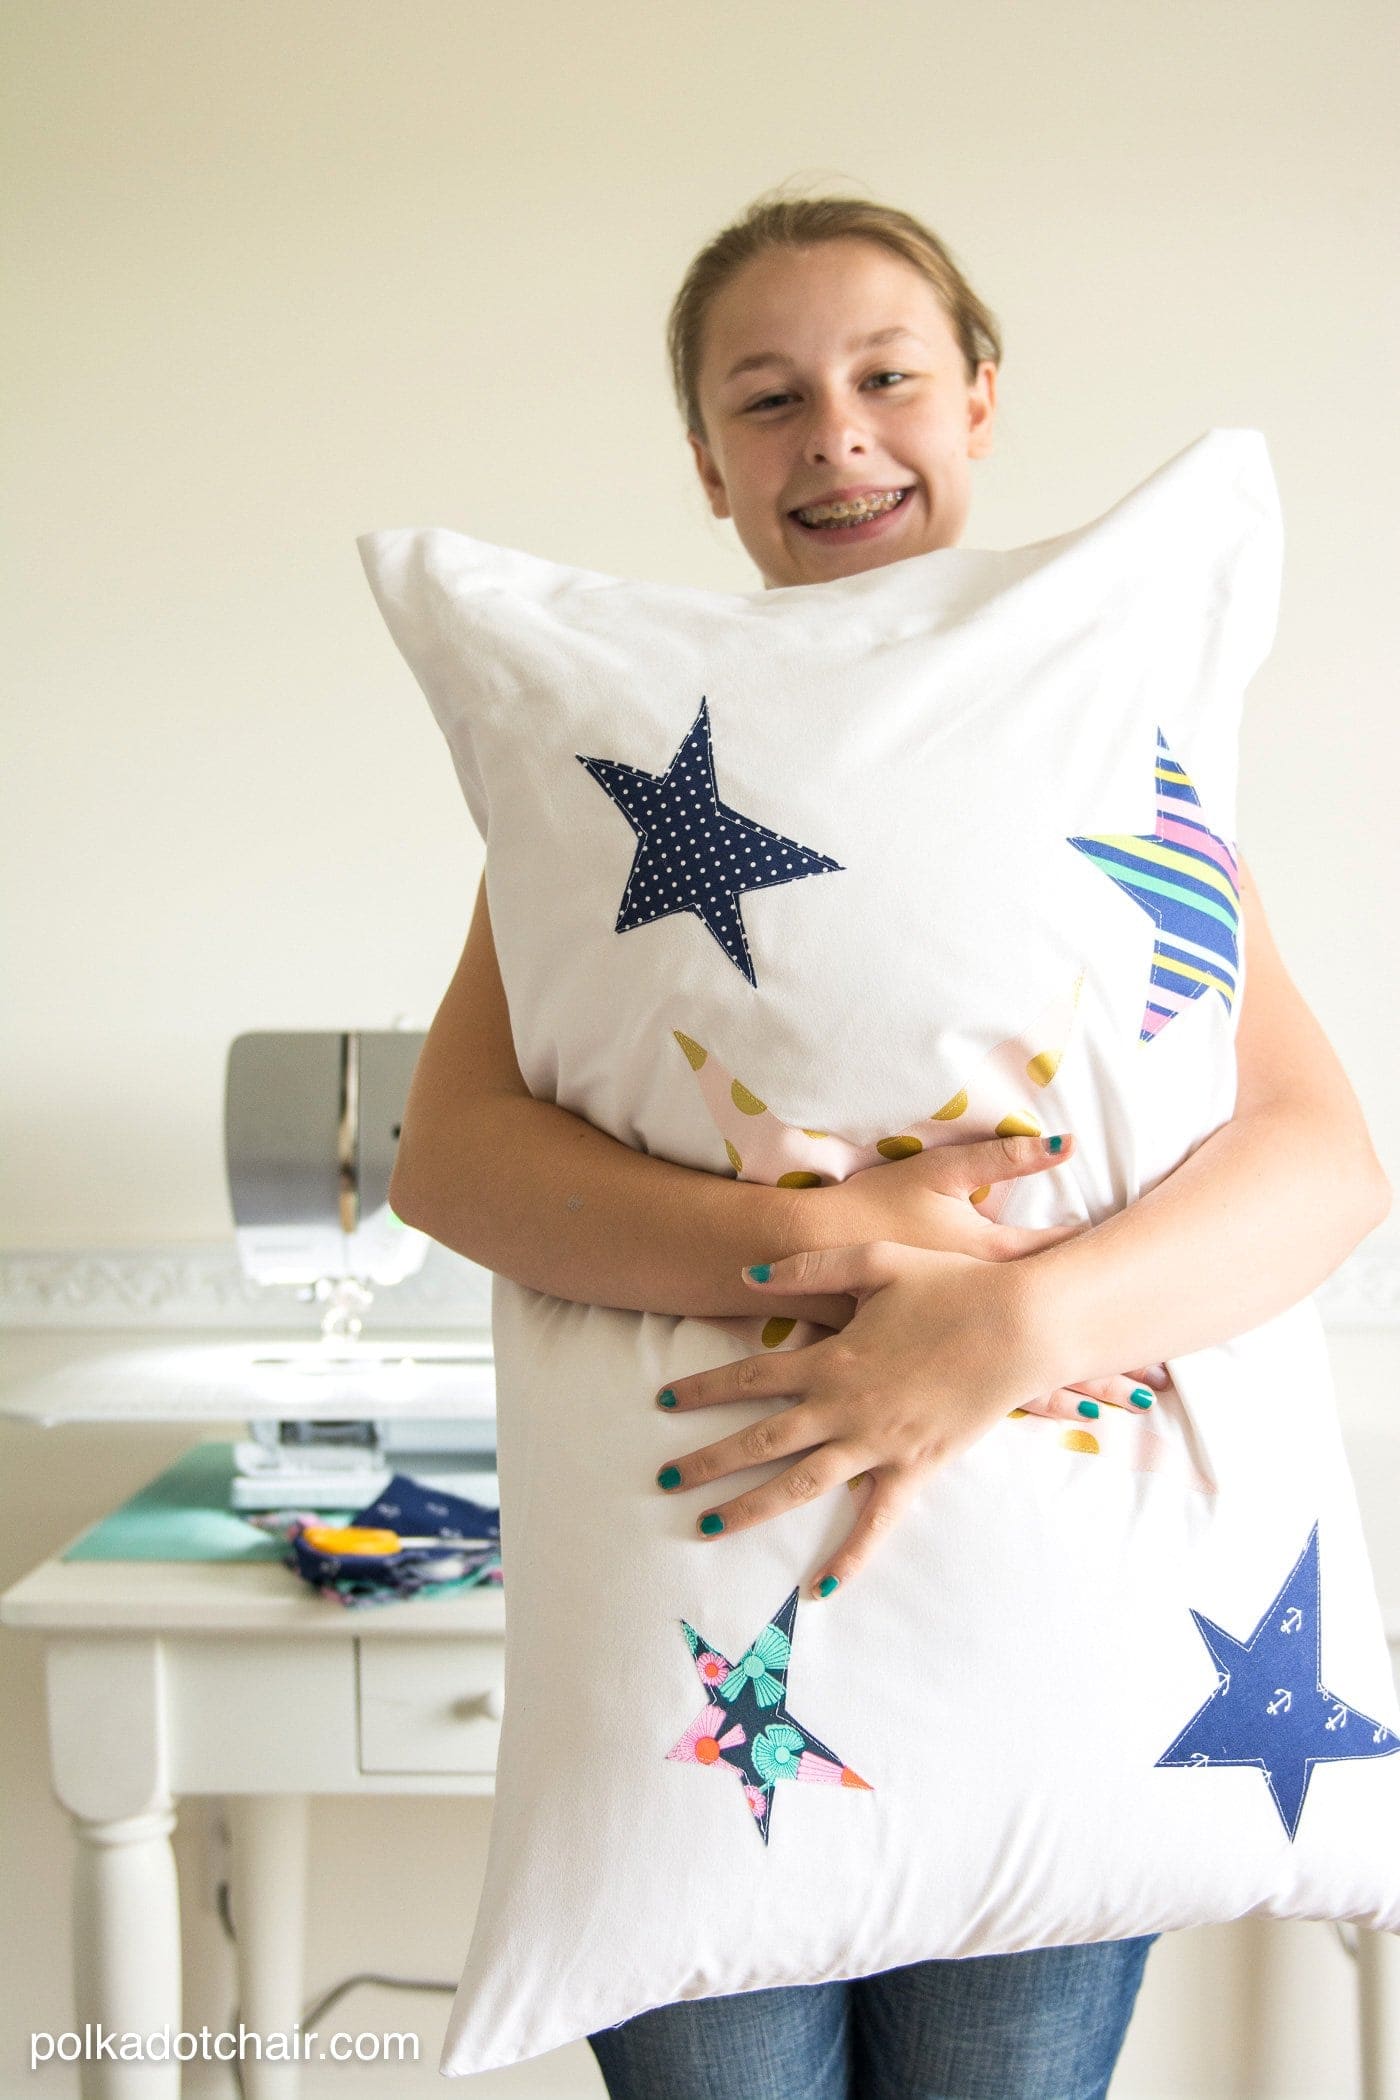 Sewing Projects for Kids, a Pillowcase Project